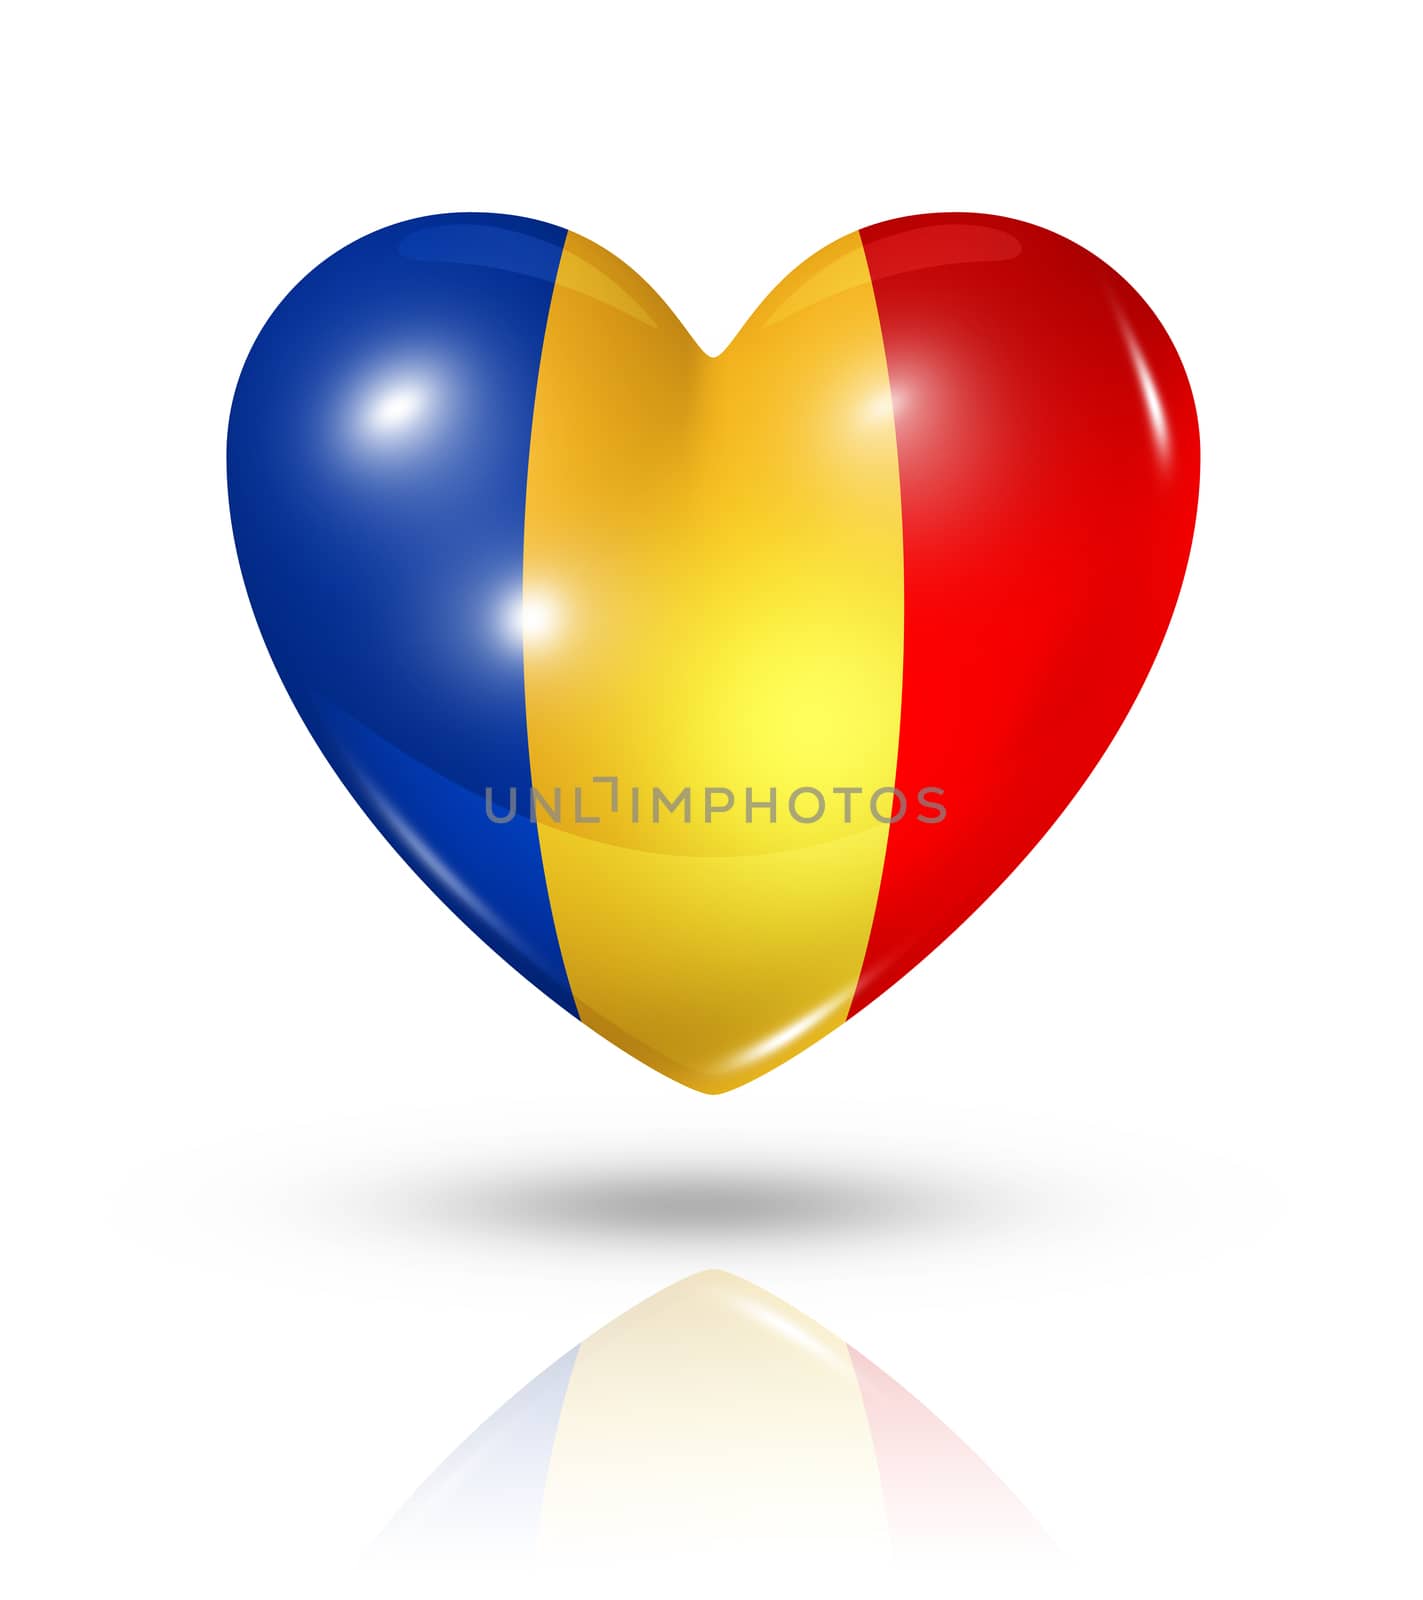 Love Chad, heart flag icon by daboost